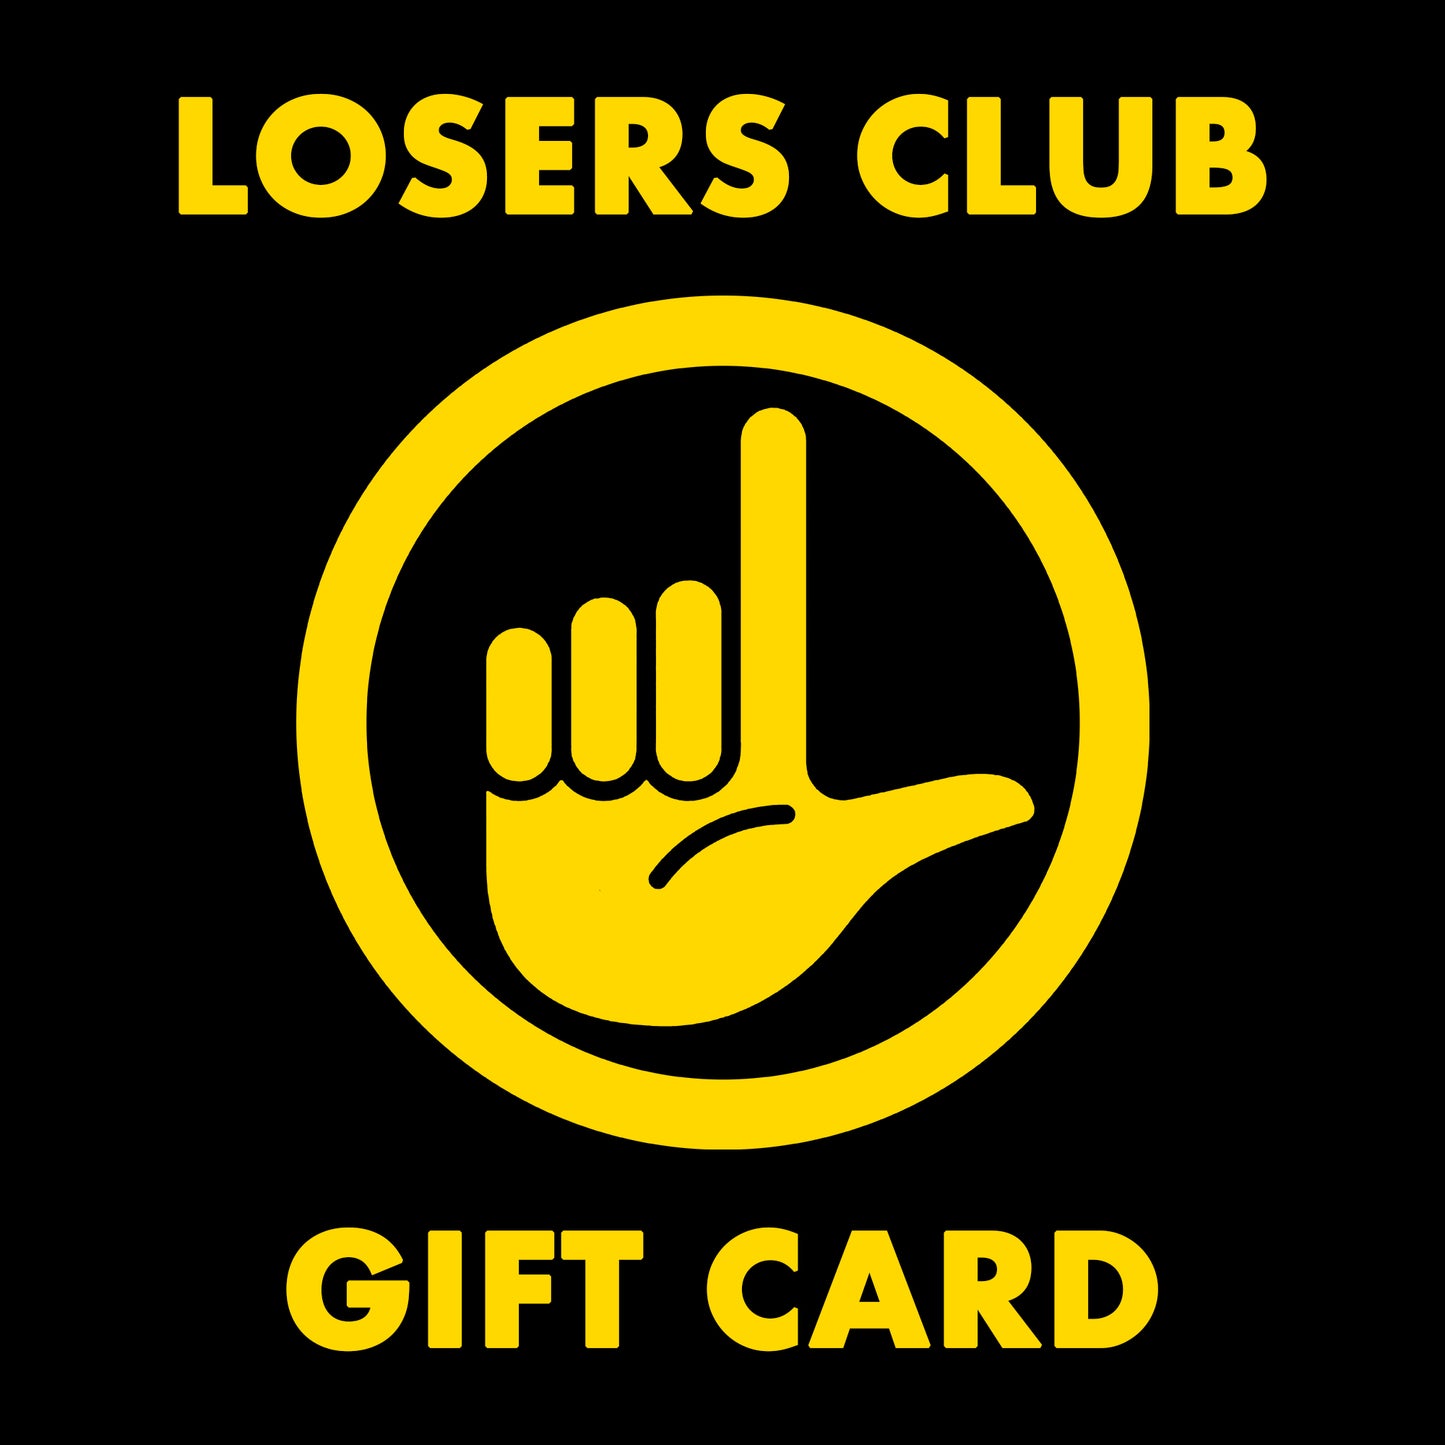 Losers Club Gift Card